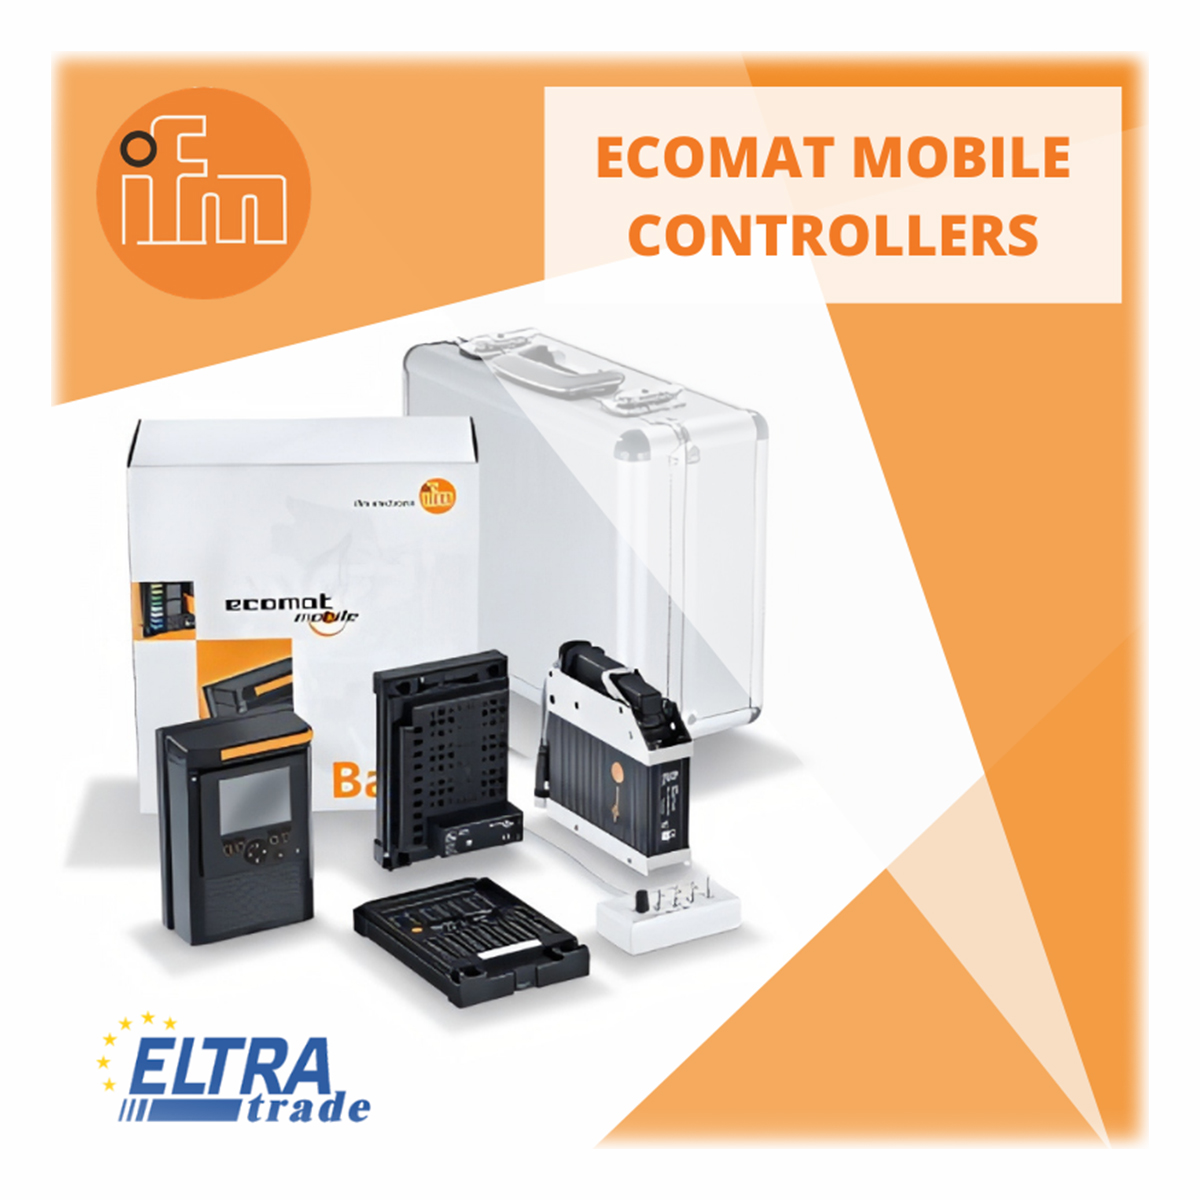 ifm ecomat mobile controllers photo